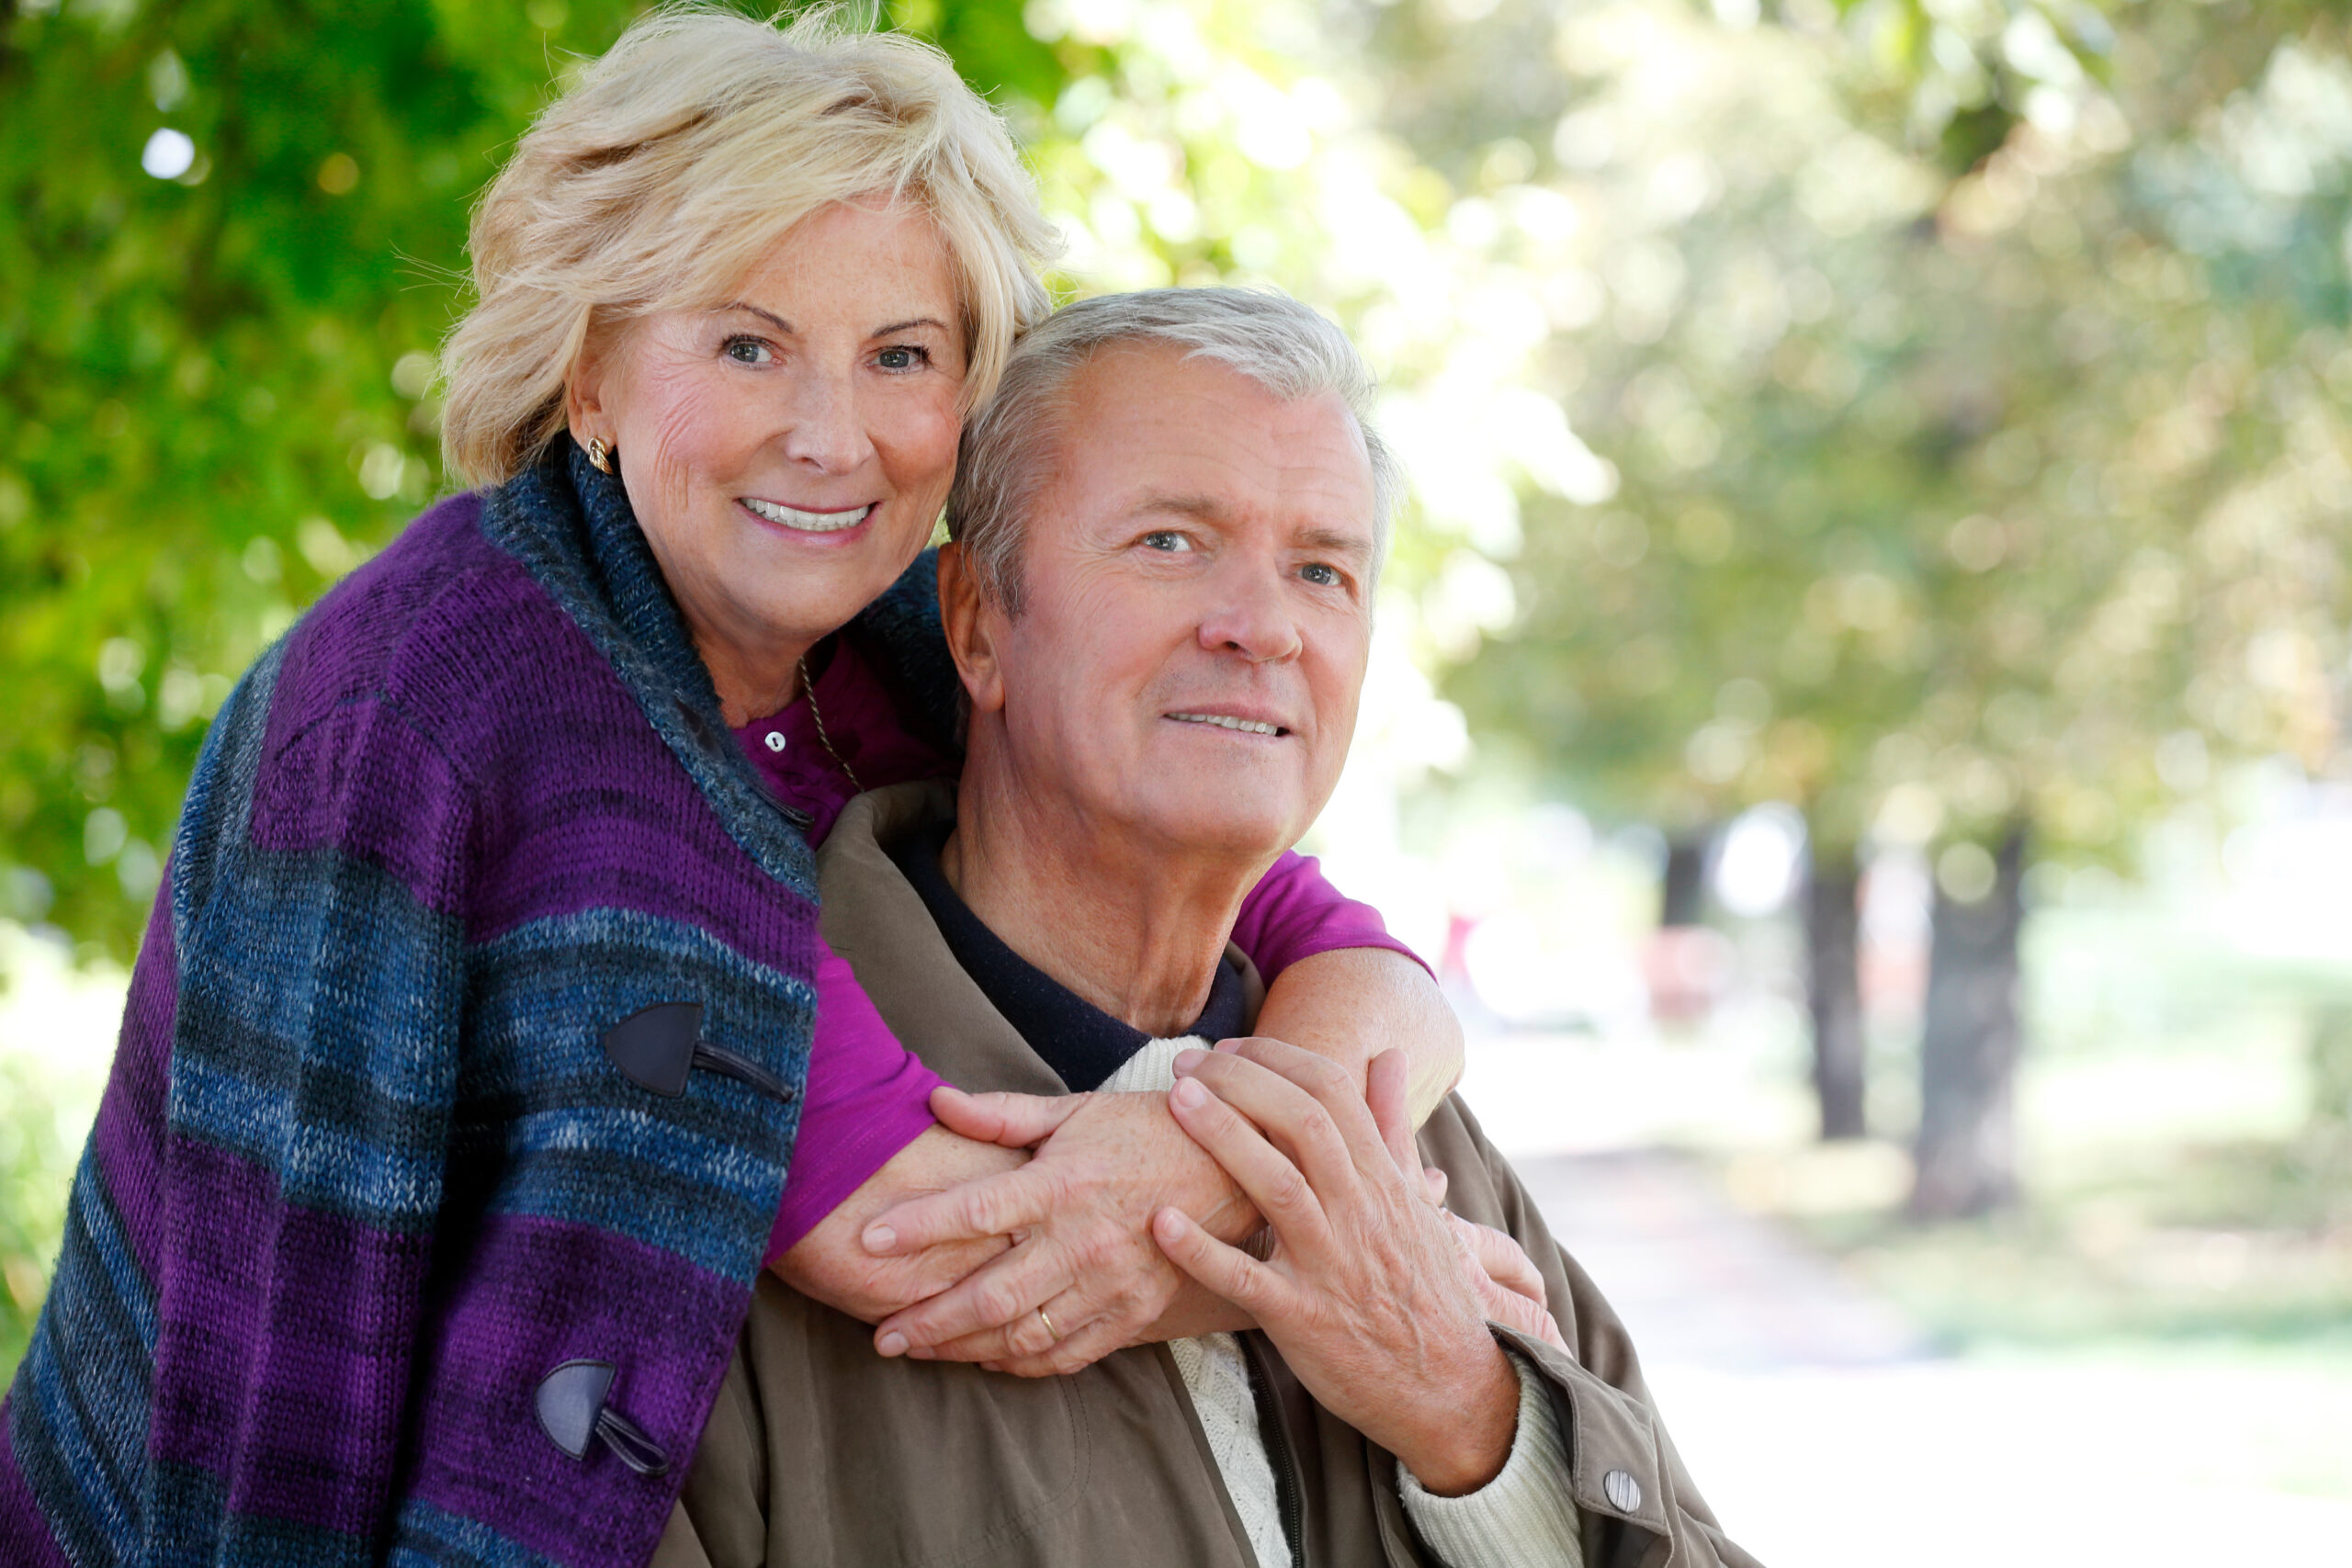 Close-up outdoor portrait of a senior couple smiling to the camera while elderly woman is hugging old man